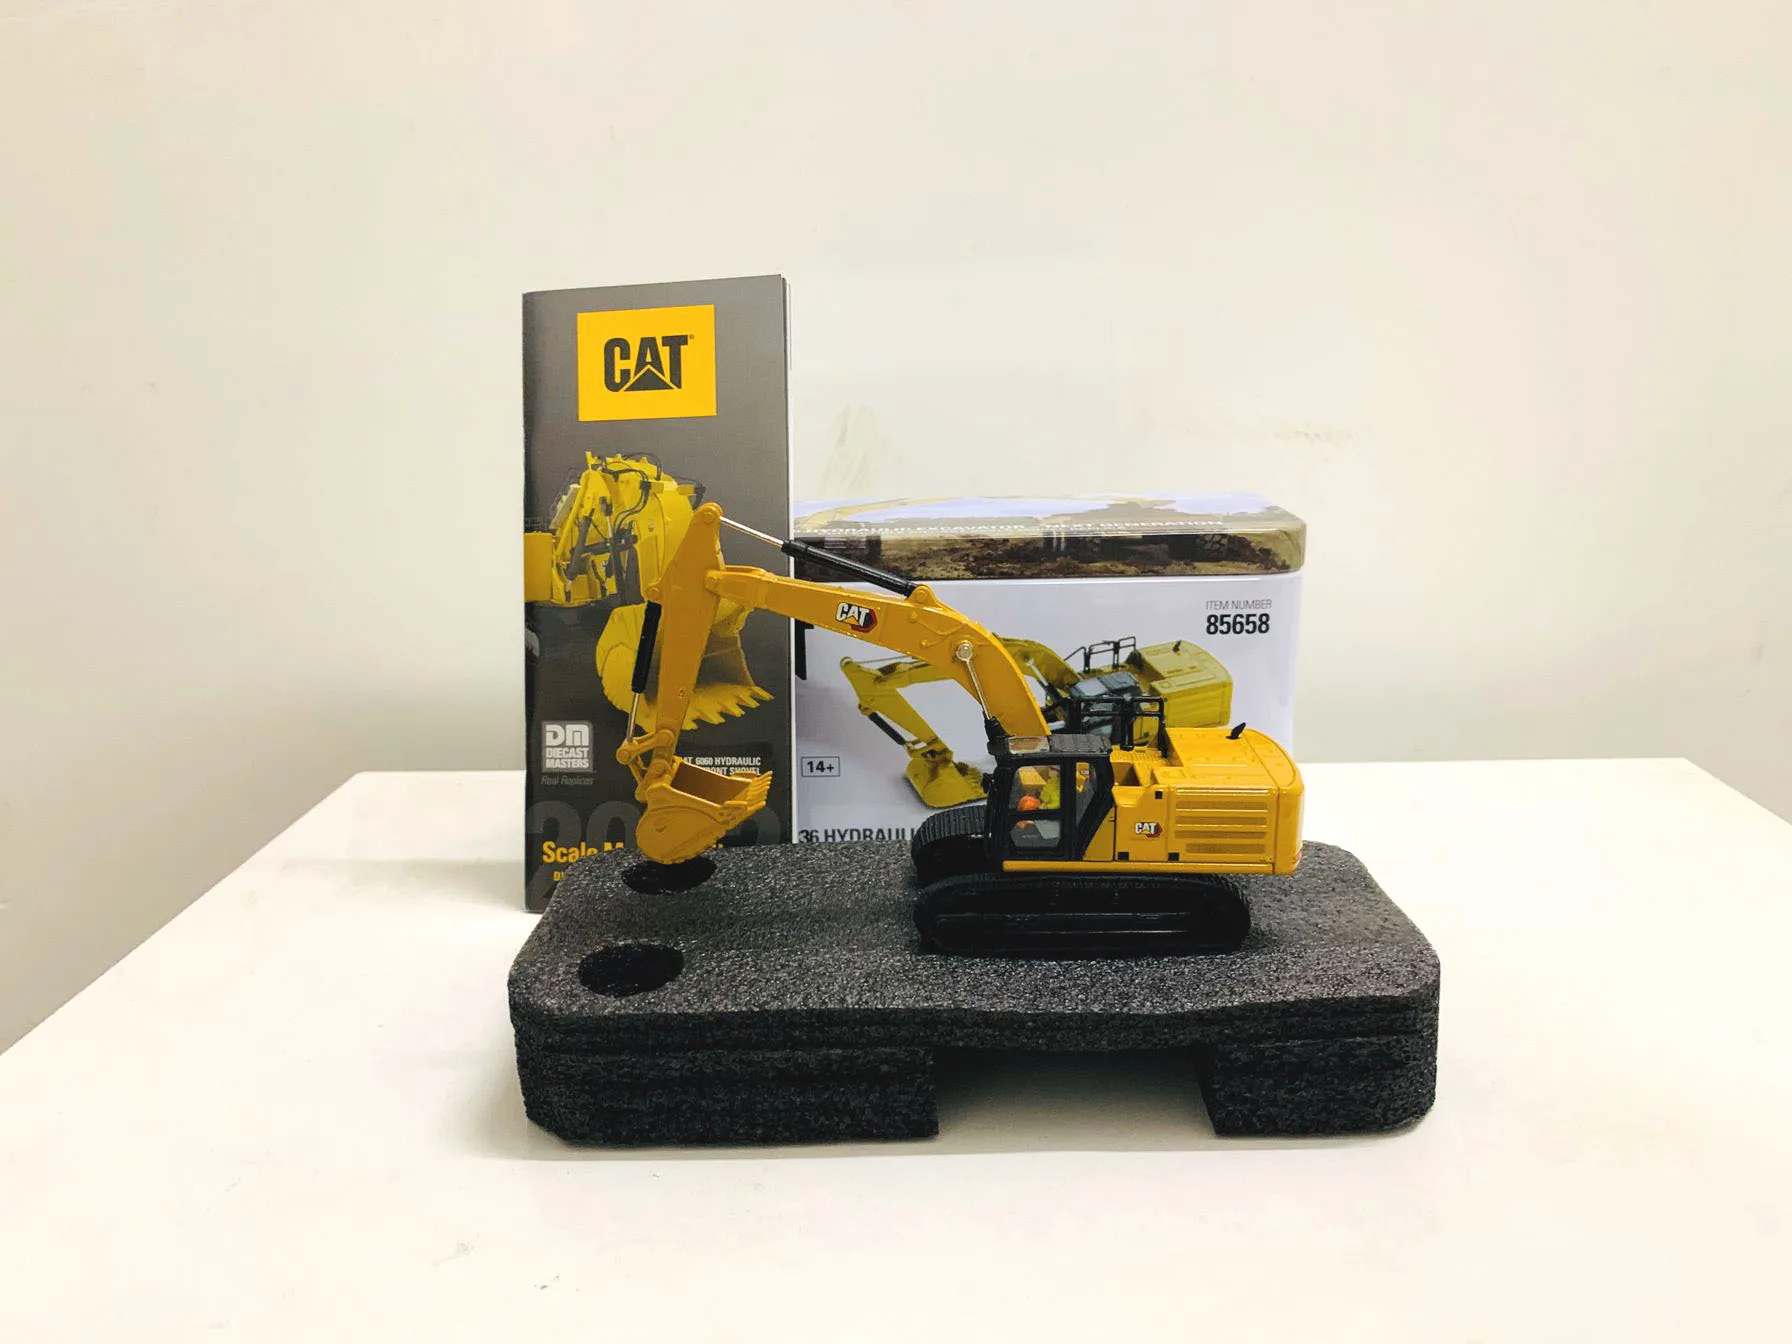 

DM 336 Hydraulic Excavator Next Generation 1:87 Ho Scale Metal By DieCast Masters 85658 Collectible Model New in Box